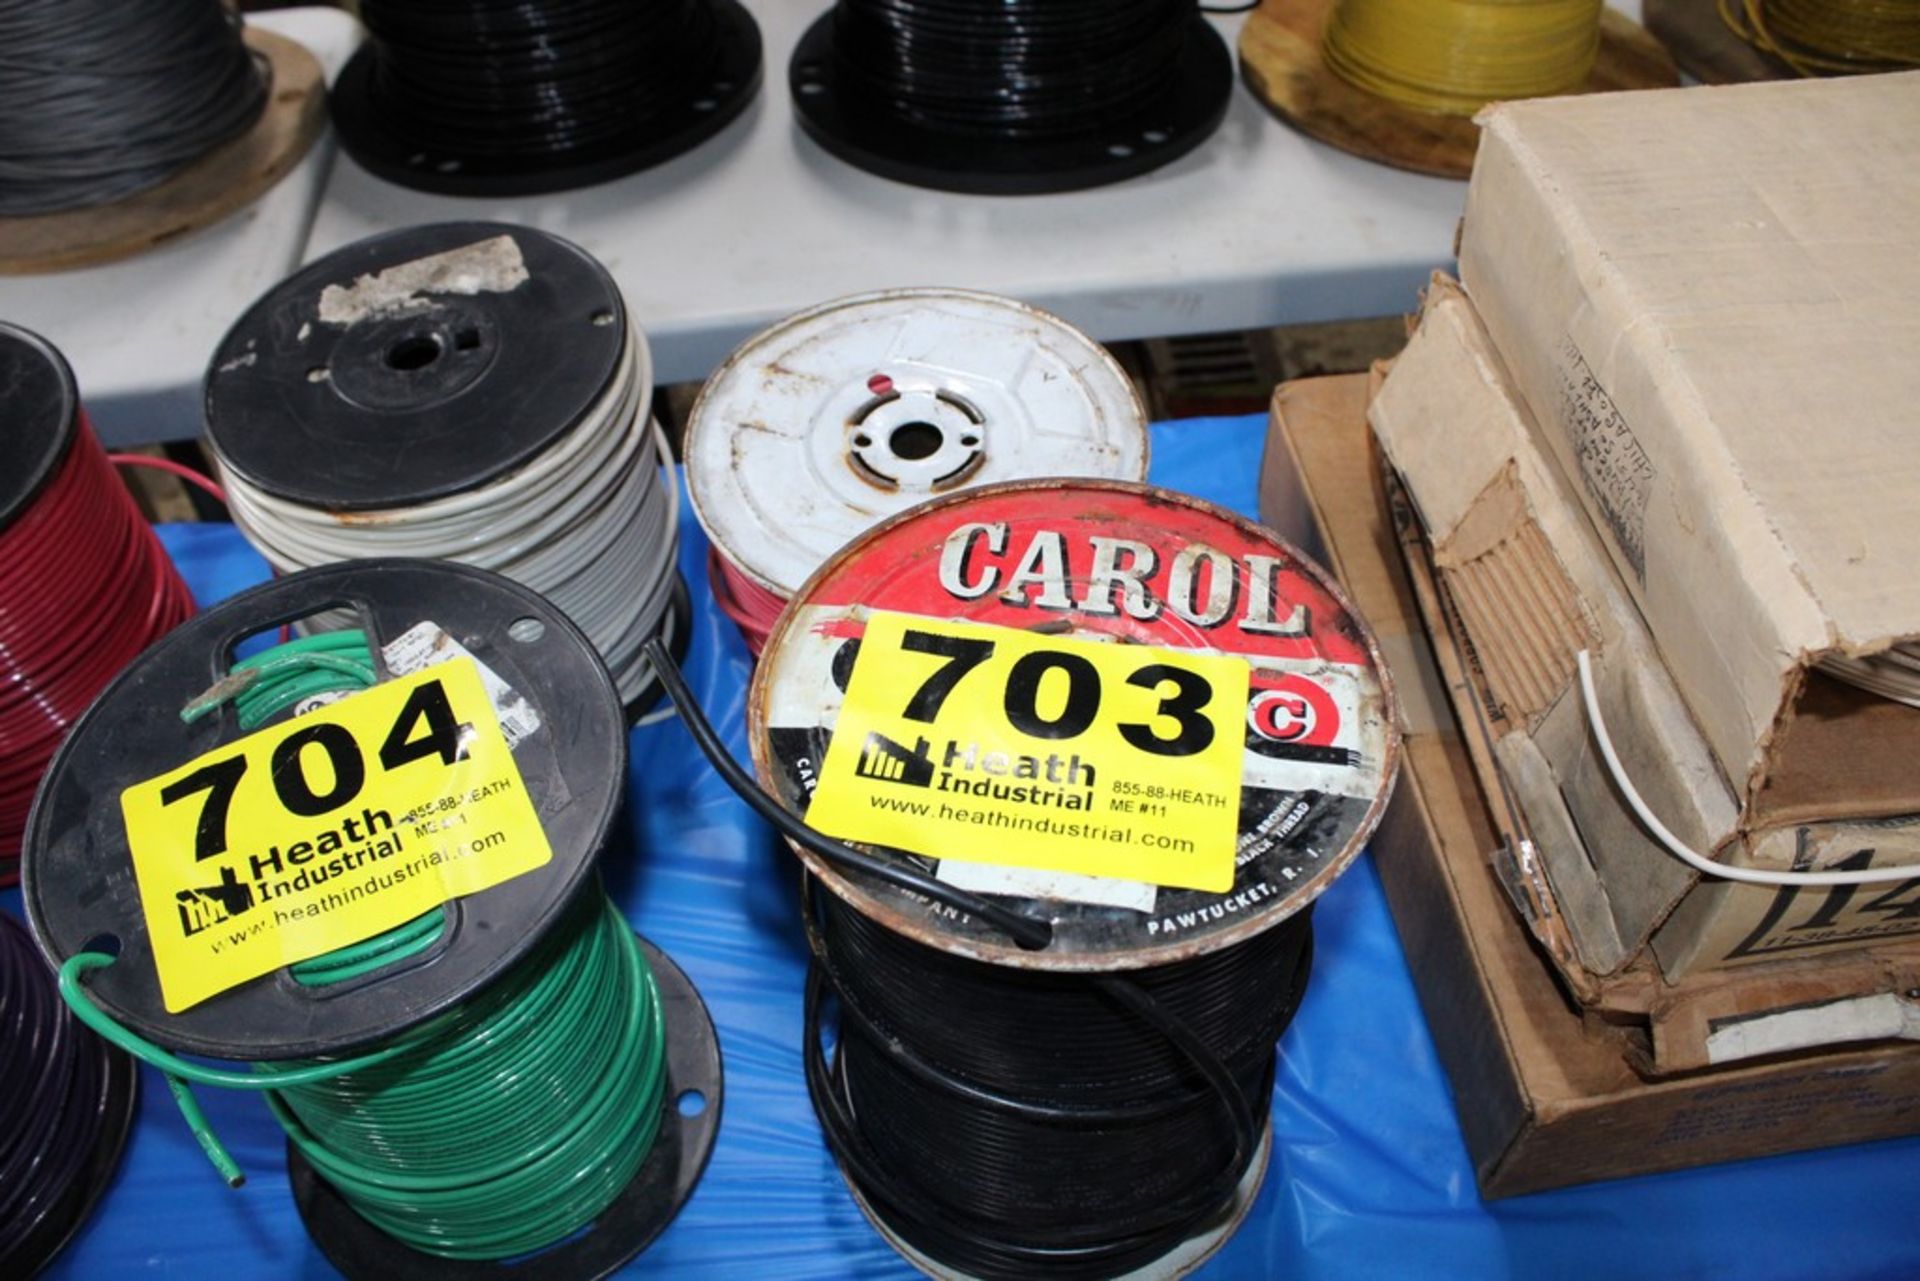 (2) SPOOLS OF ELECTRICAL WIRE, 10 AWG & 12 AWG